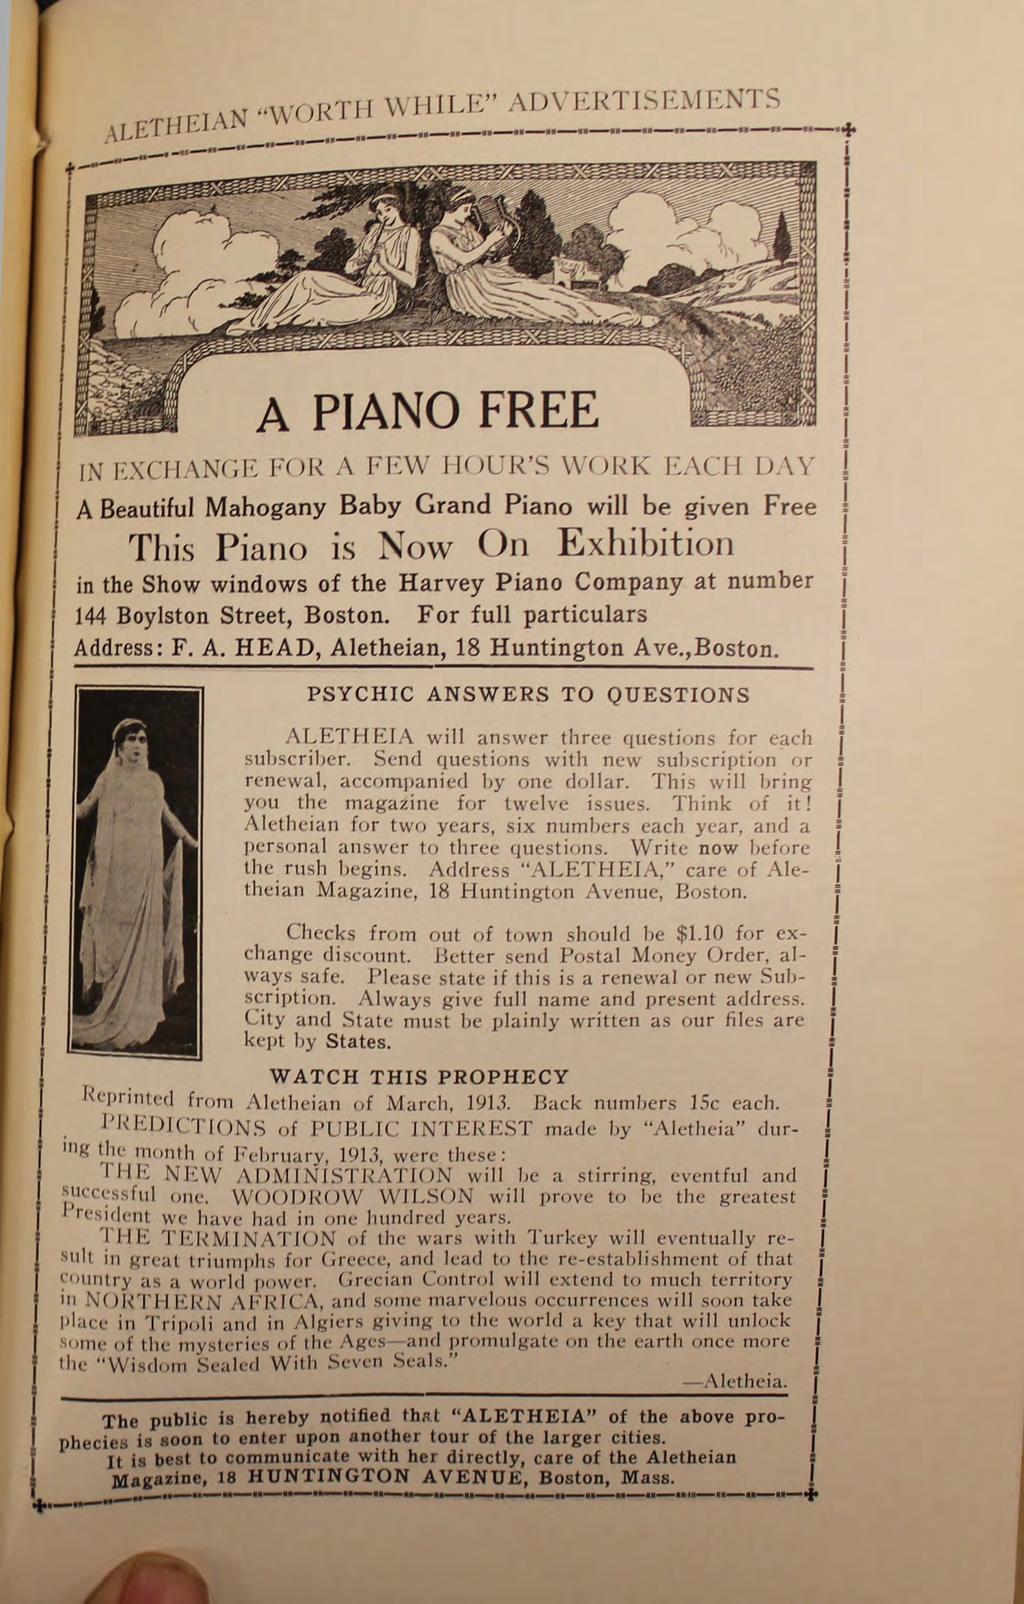 WORTH WHLE ADVERTSEMENTS FREE N EXCHANGE FO R A F E W H O U R S W O R K E A C H D A Y A Beautful Mahogany Baby Grand Pano wll be gven Free Ths Pano s Now On Exhbton n the Show wndows of the Harvey